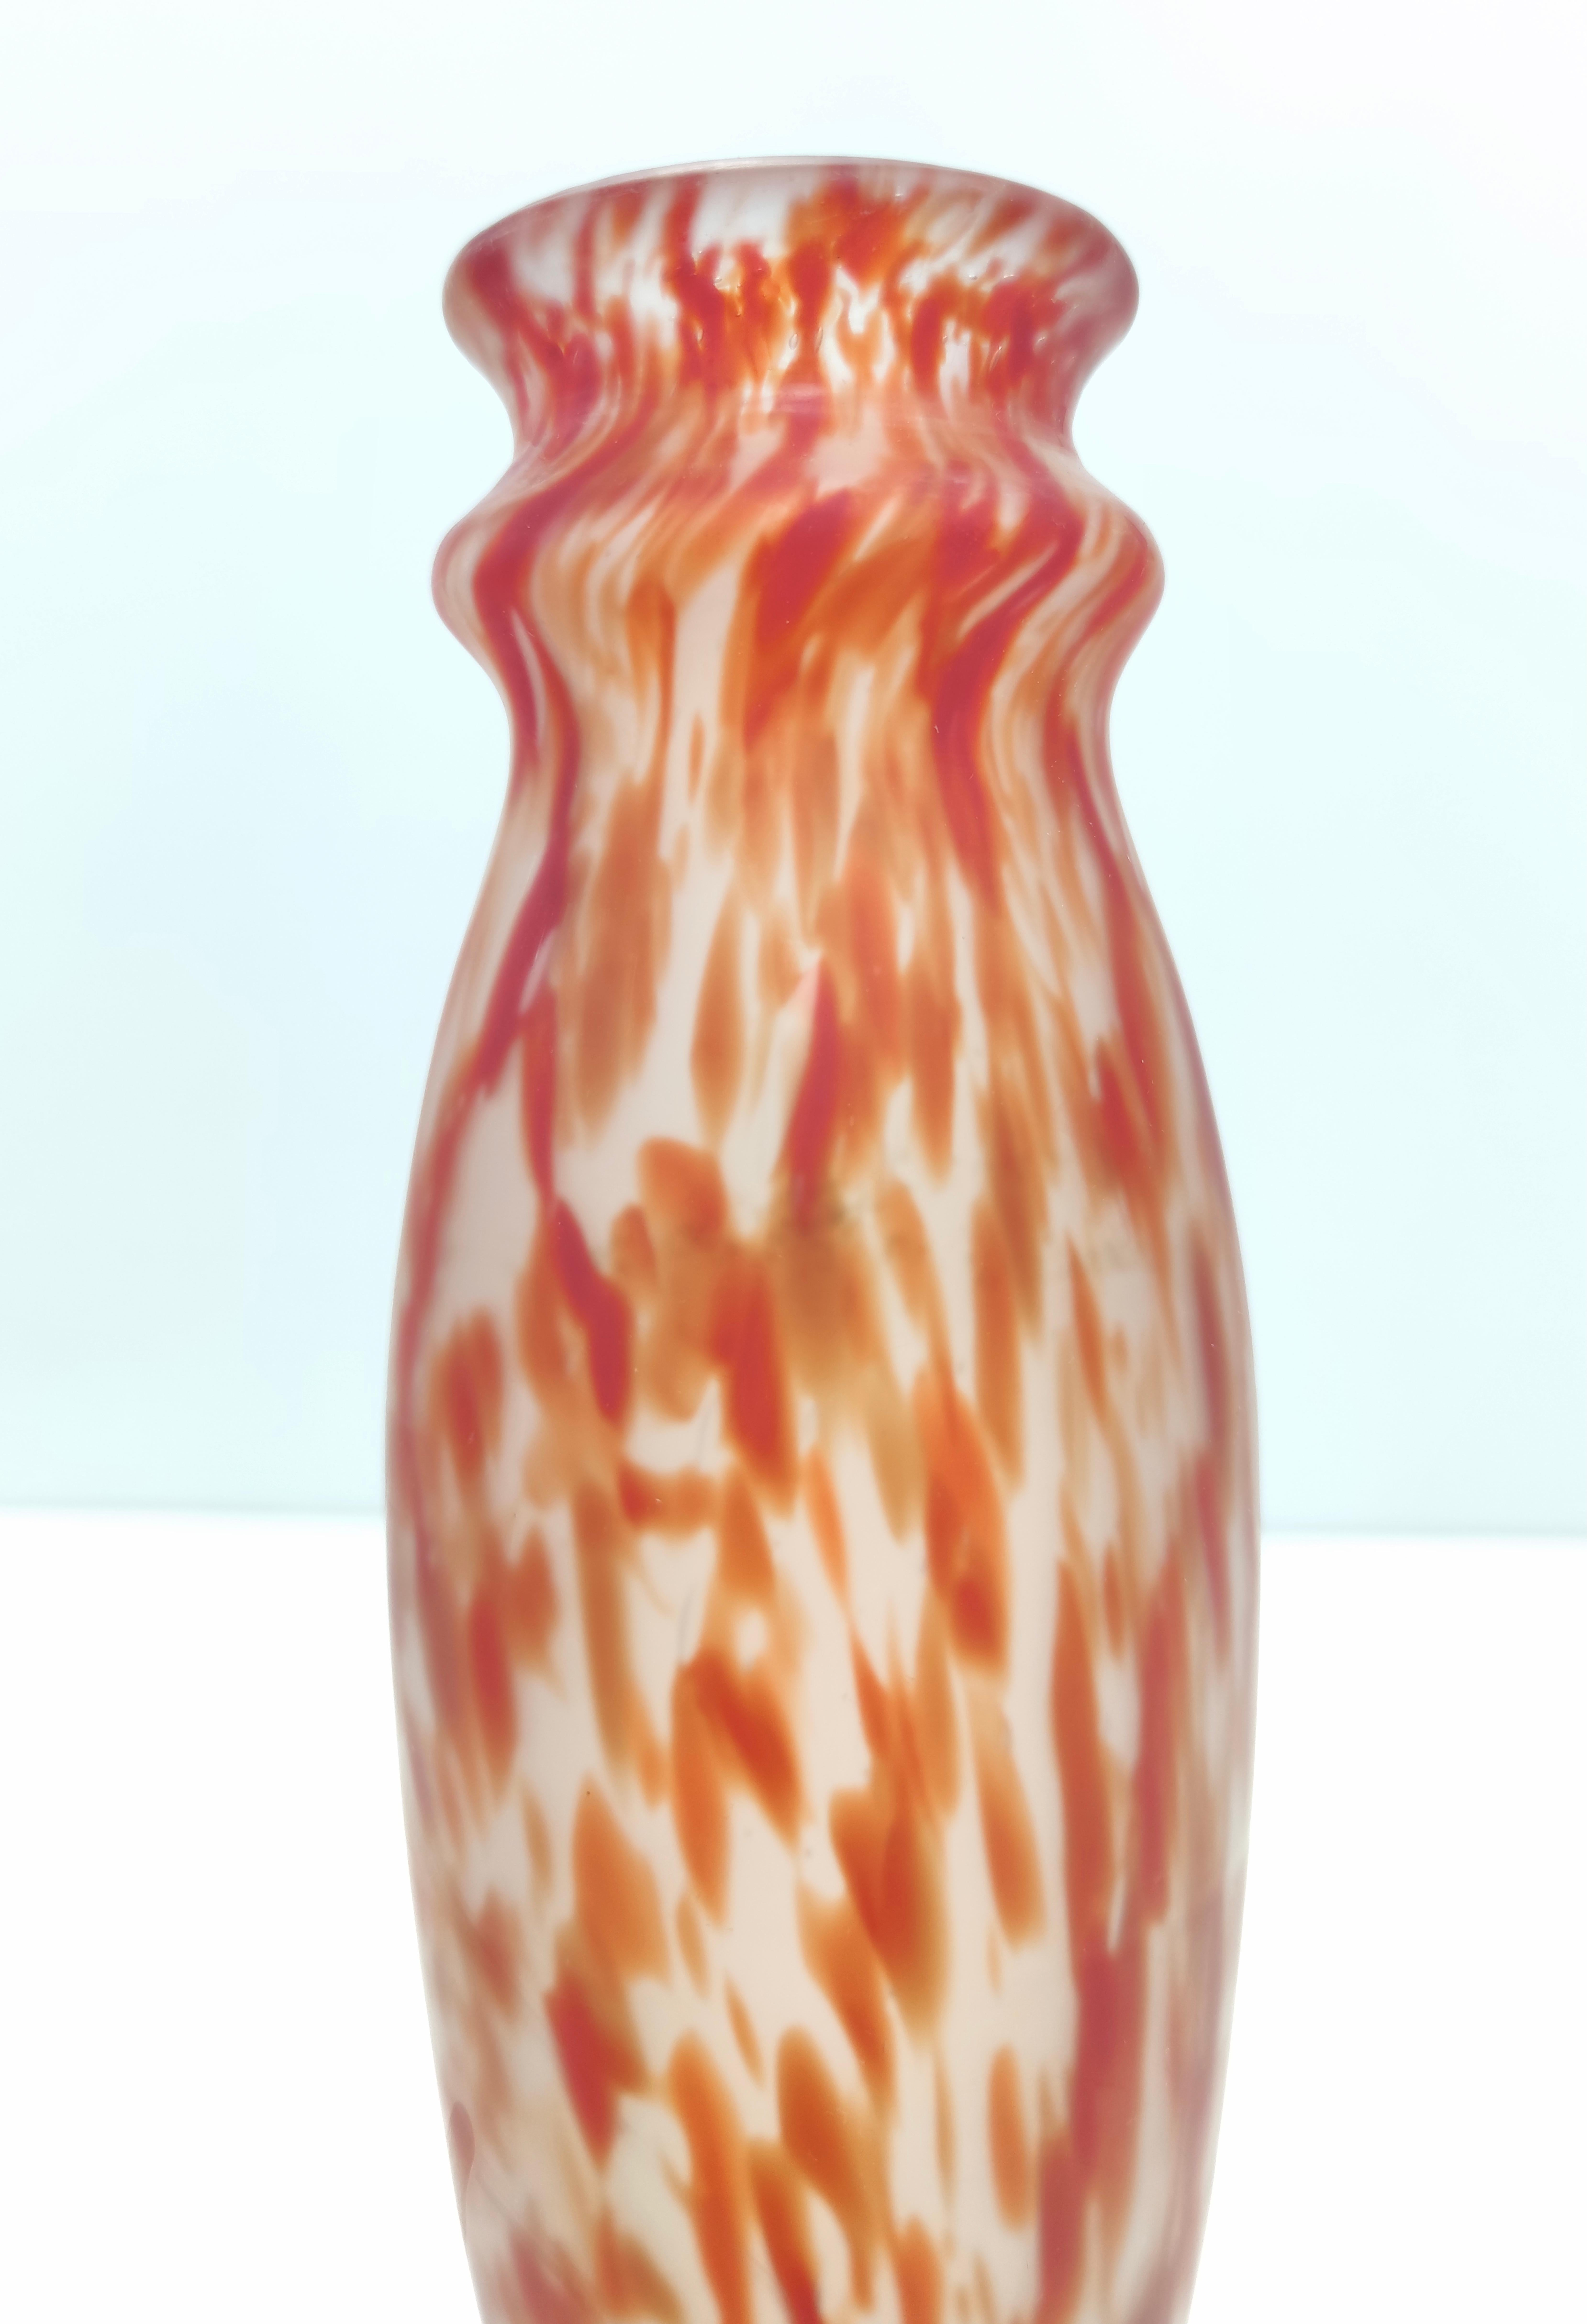 Liberty Style Red / Orange Glass Vase by Legras, France 1